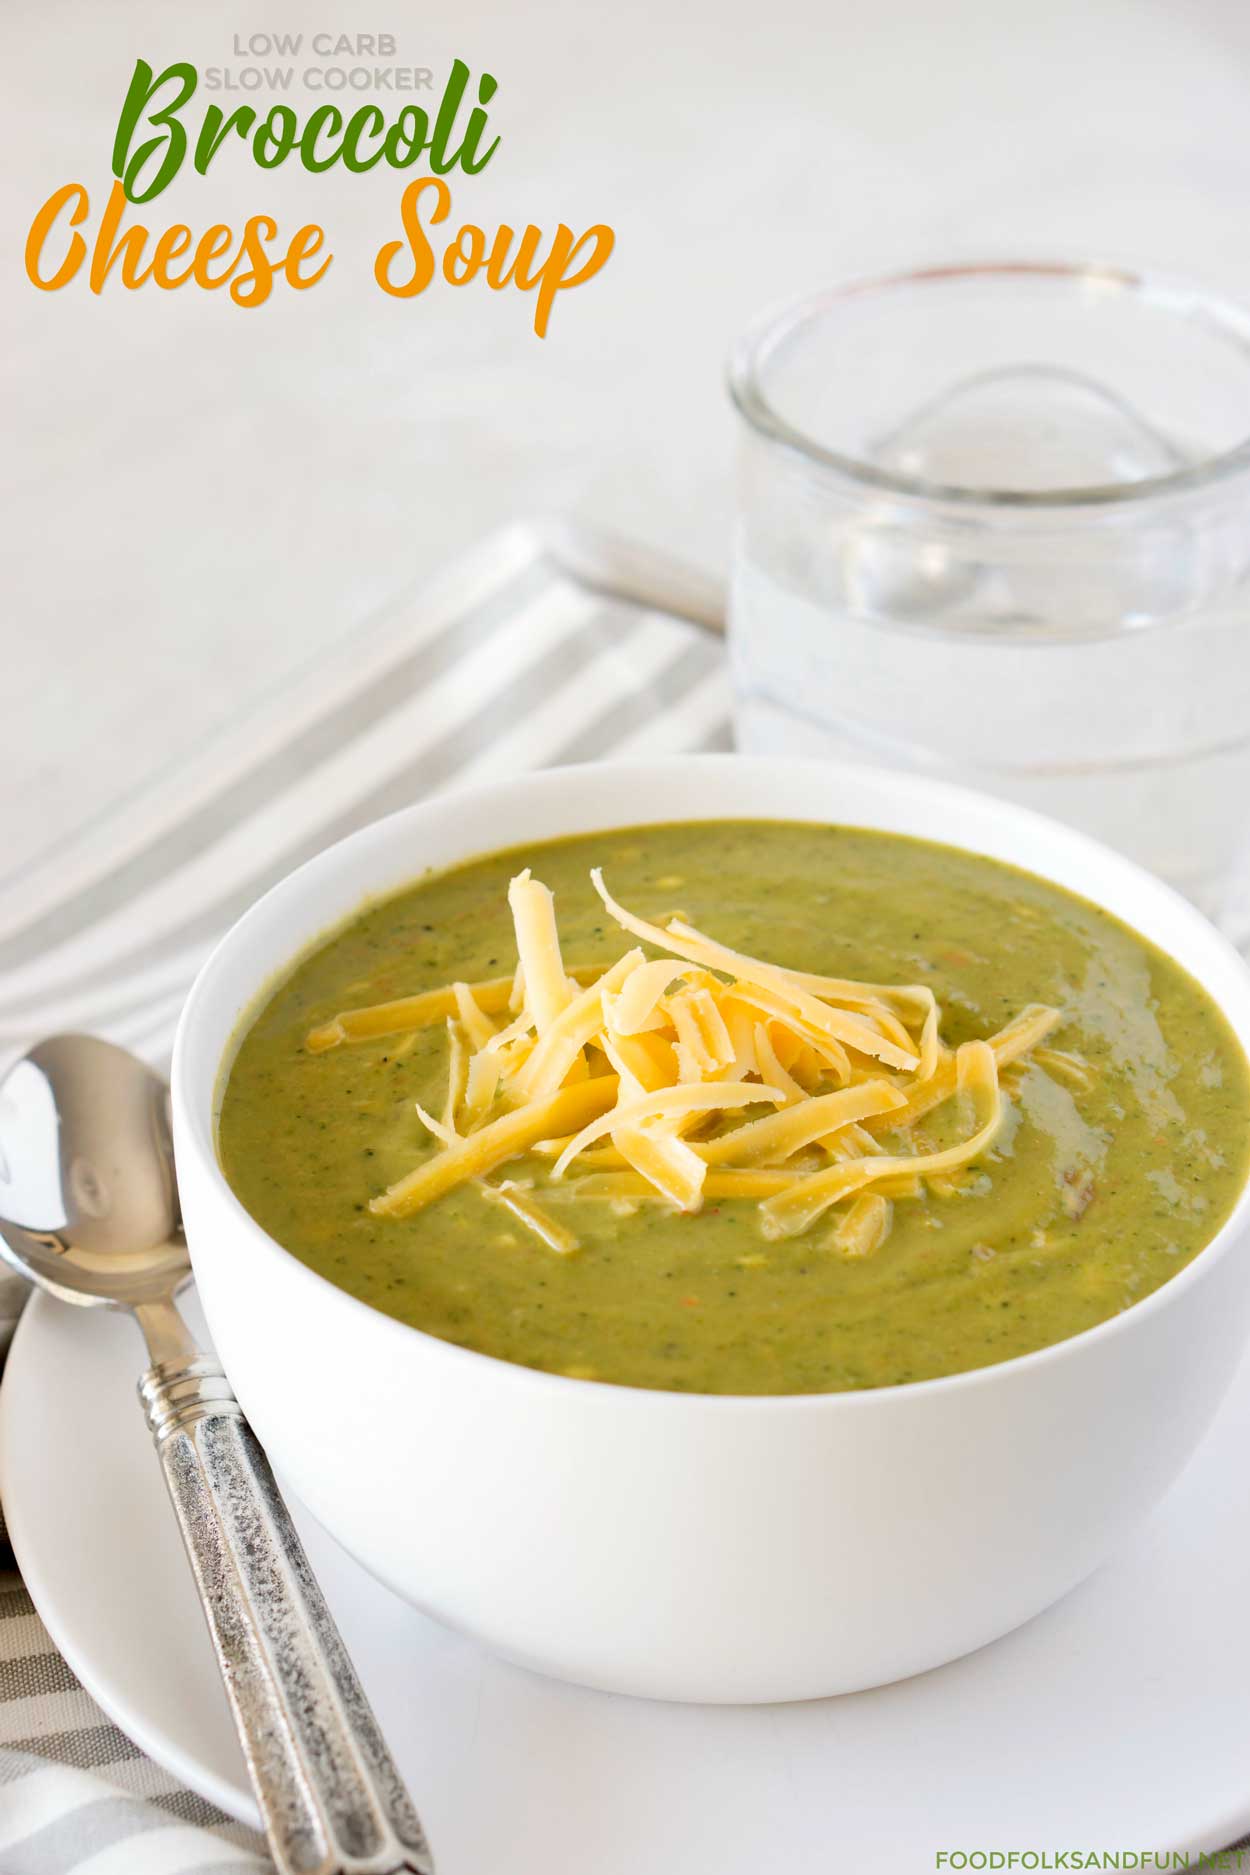 Best Low Carb Broccoli Cheese Soup